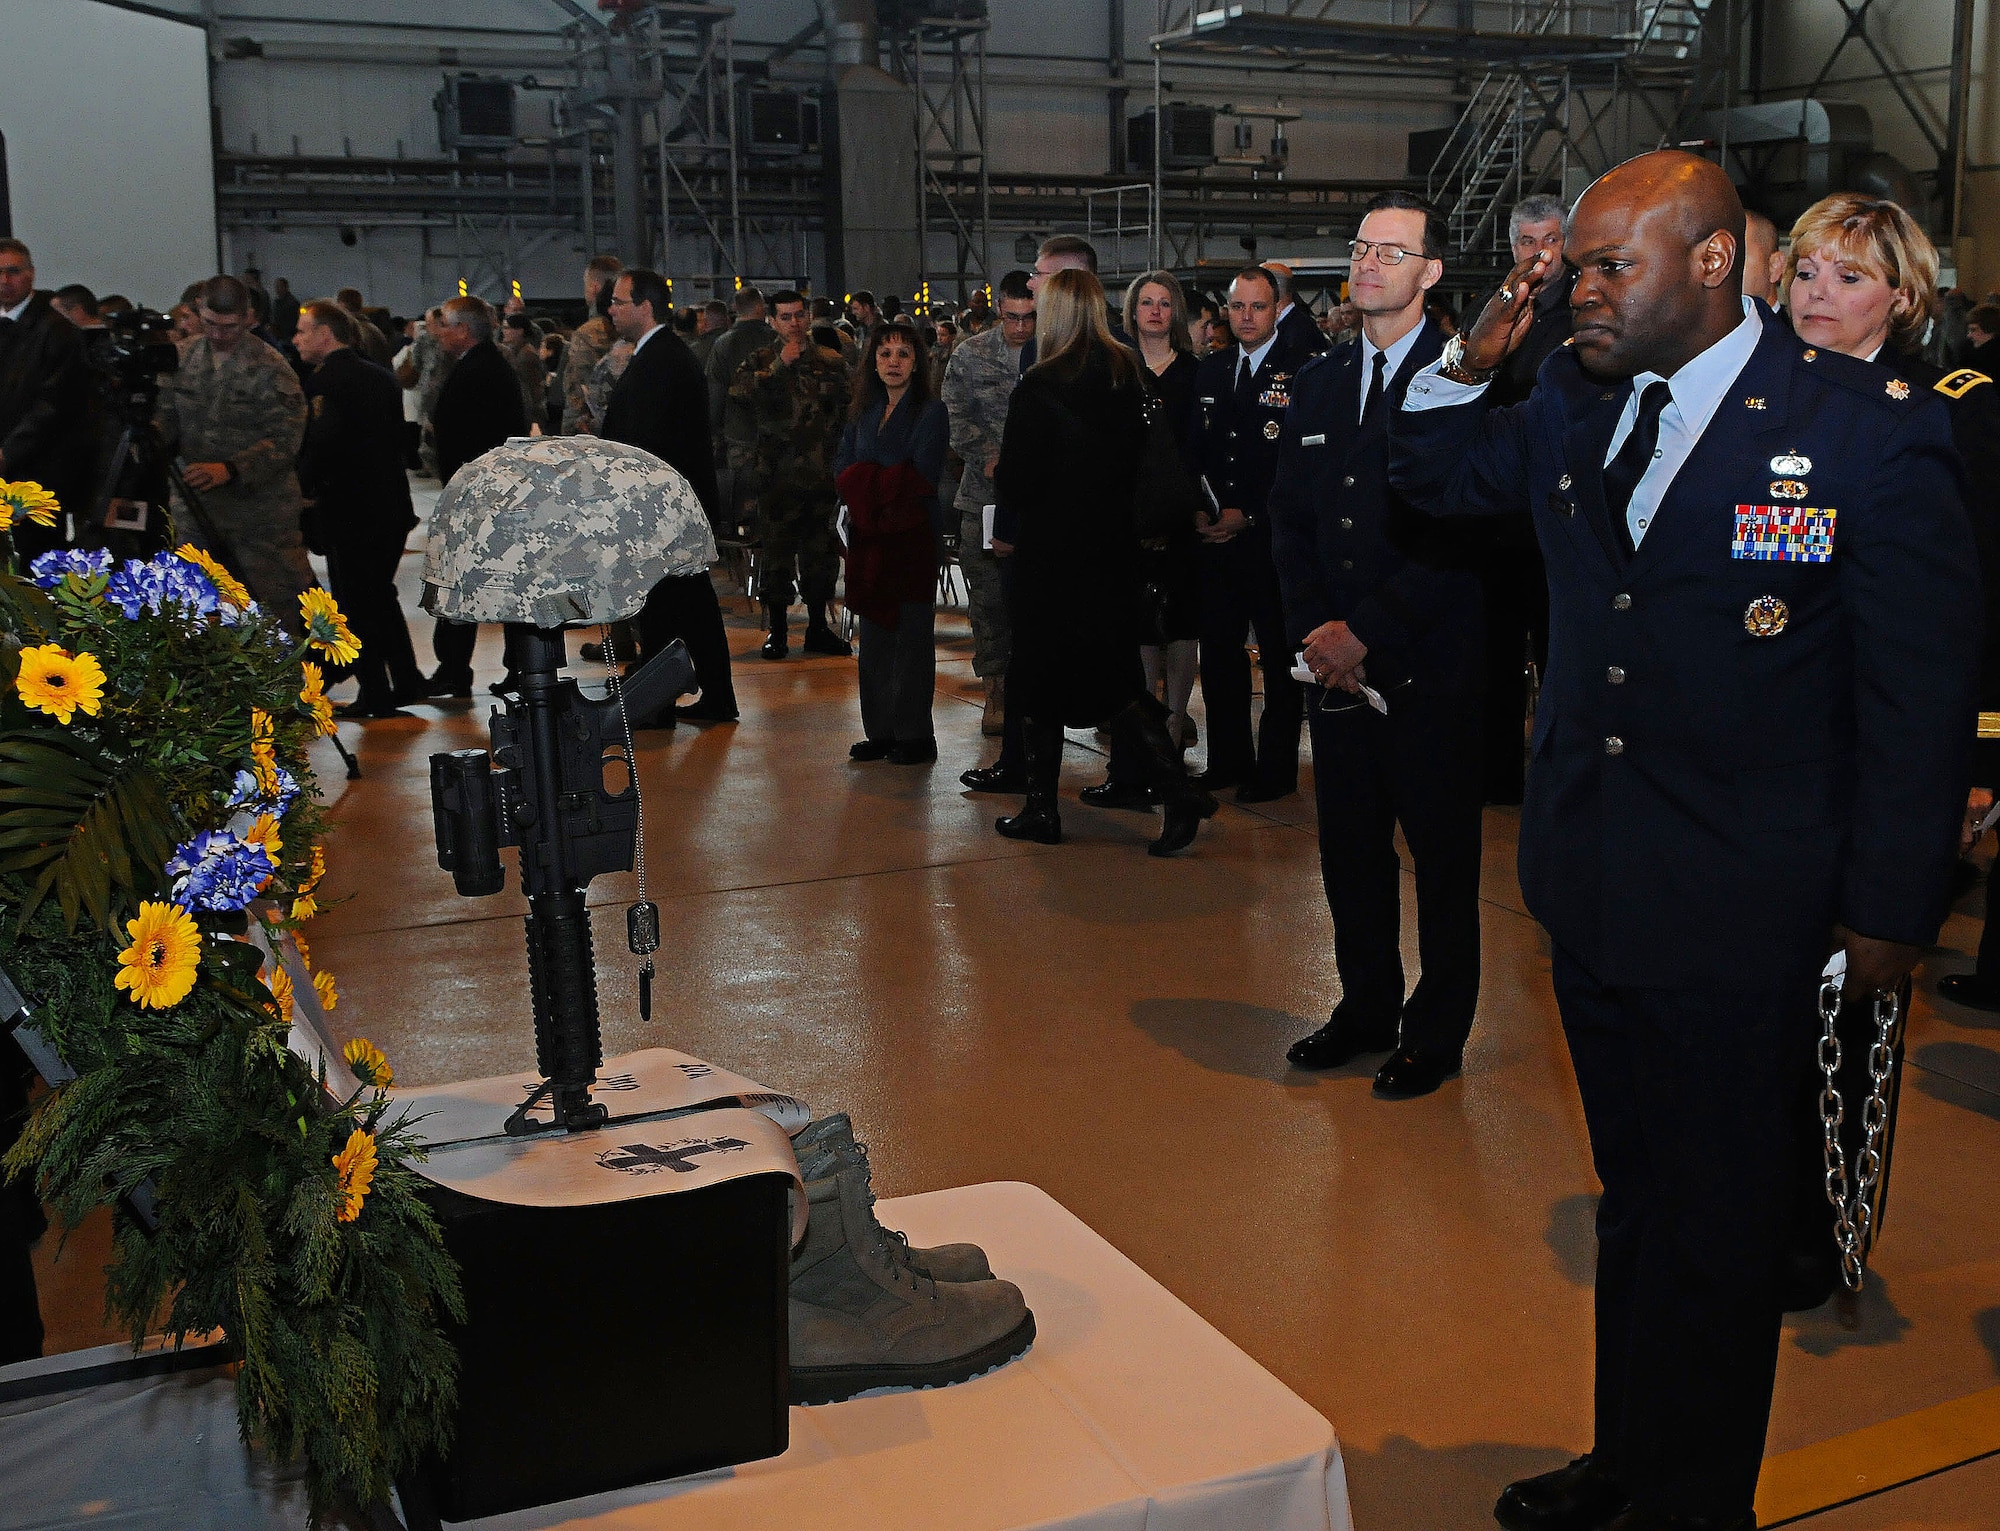 U.S. Air Force Lt. Col. Uduak Udoaka, 86th Vehicle Readiness Squadron commander, pays his respects during the memorial service for Airman 1st Class Zachary Cuddeback, 86th Vehicle Readiness Squadron, Ramstein Air Base, Germany, March 10, 2011. Airman Cuddeback was killed in action at Frankfurt International Airport March 2, 2011.   (U.S. Air Force photo by Airman 1st Class Desiree Whitney Esposito)